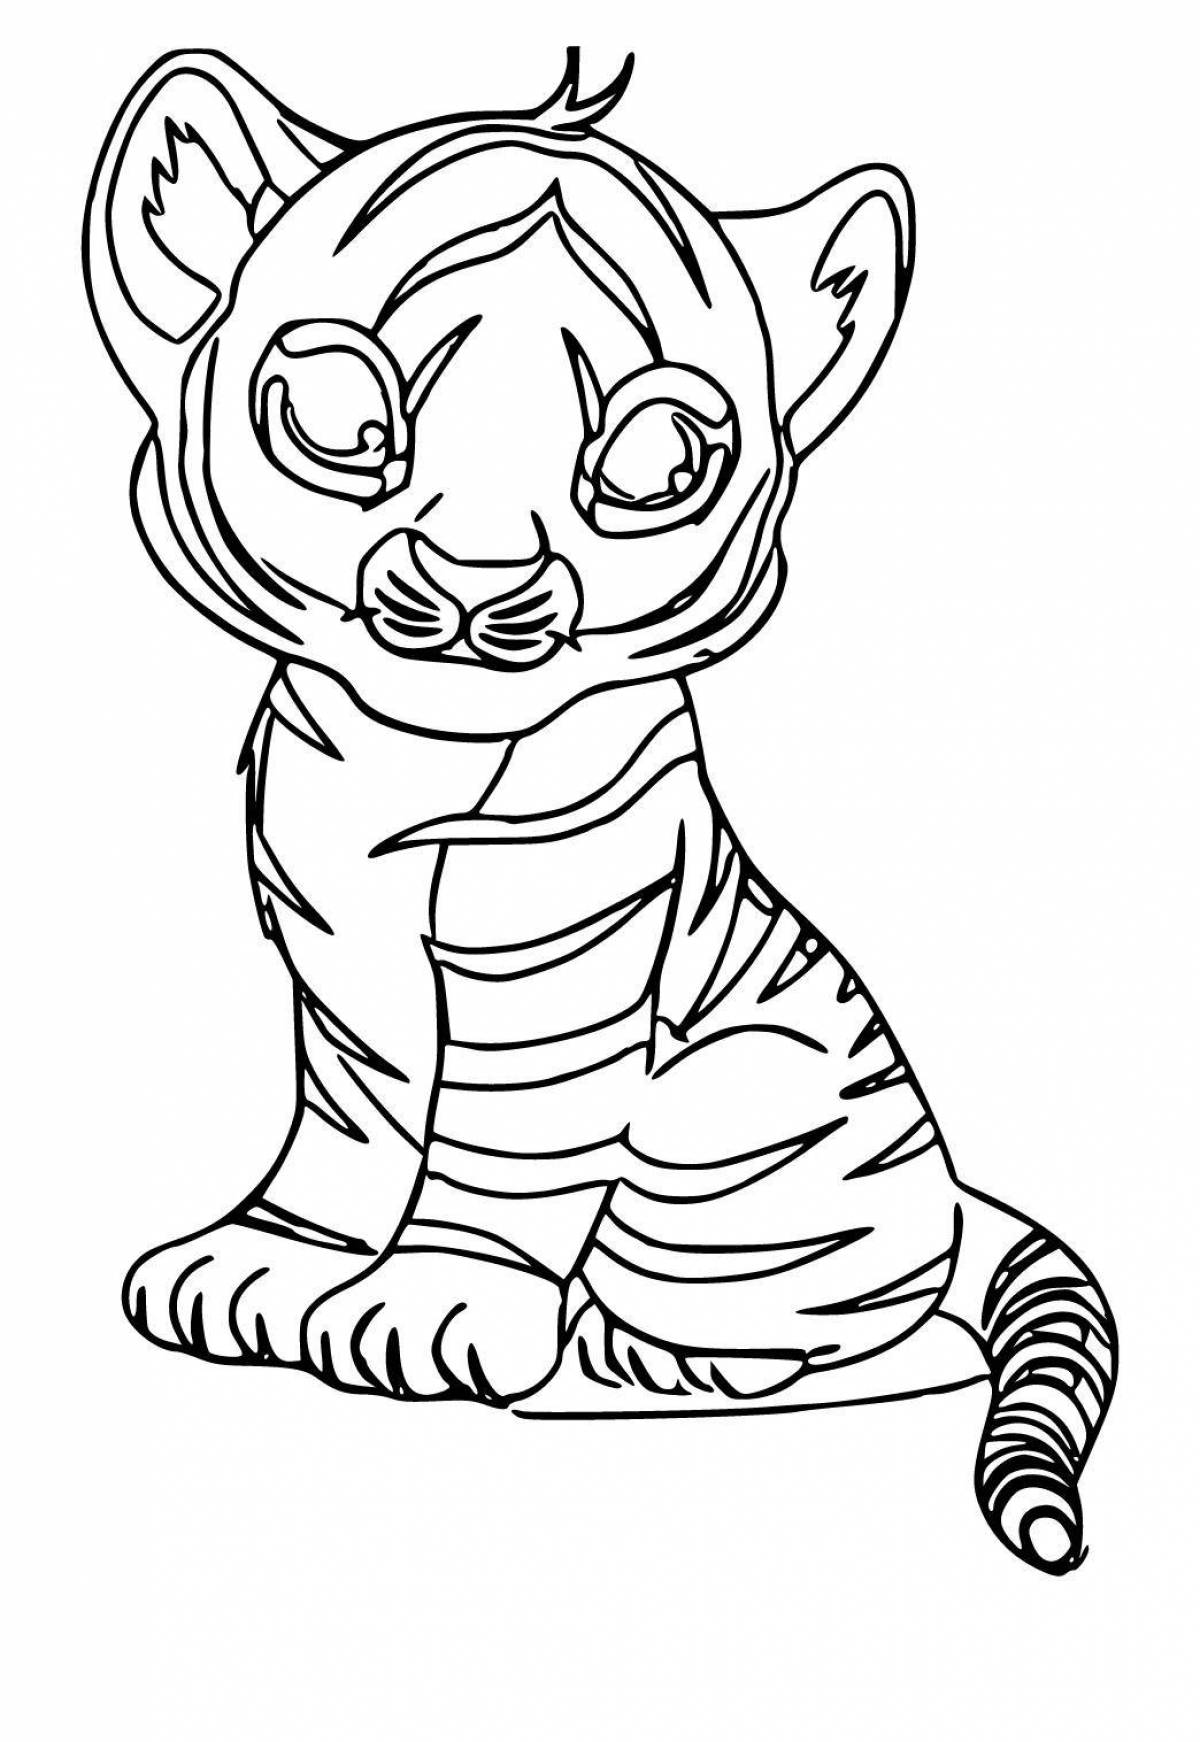 Tiger bright coloring book for children 6-7 years old